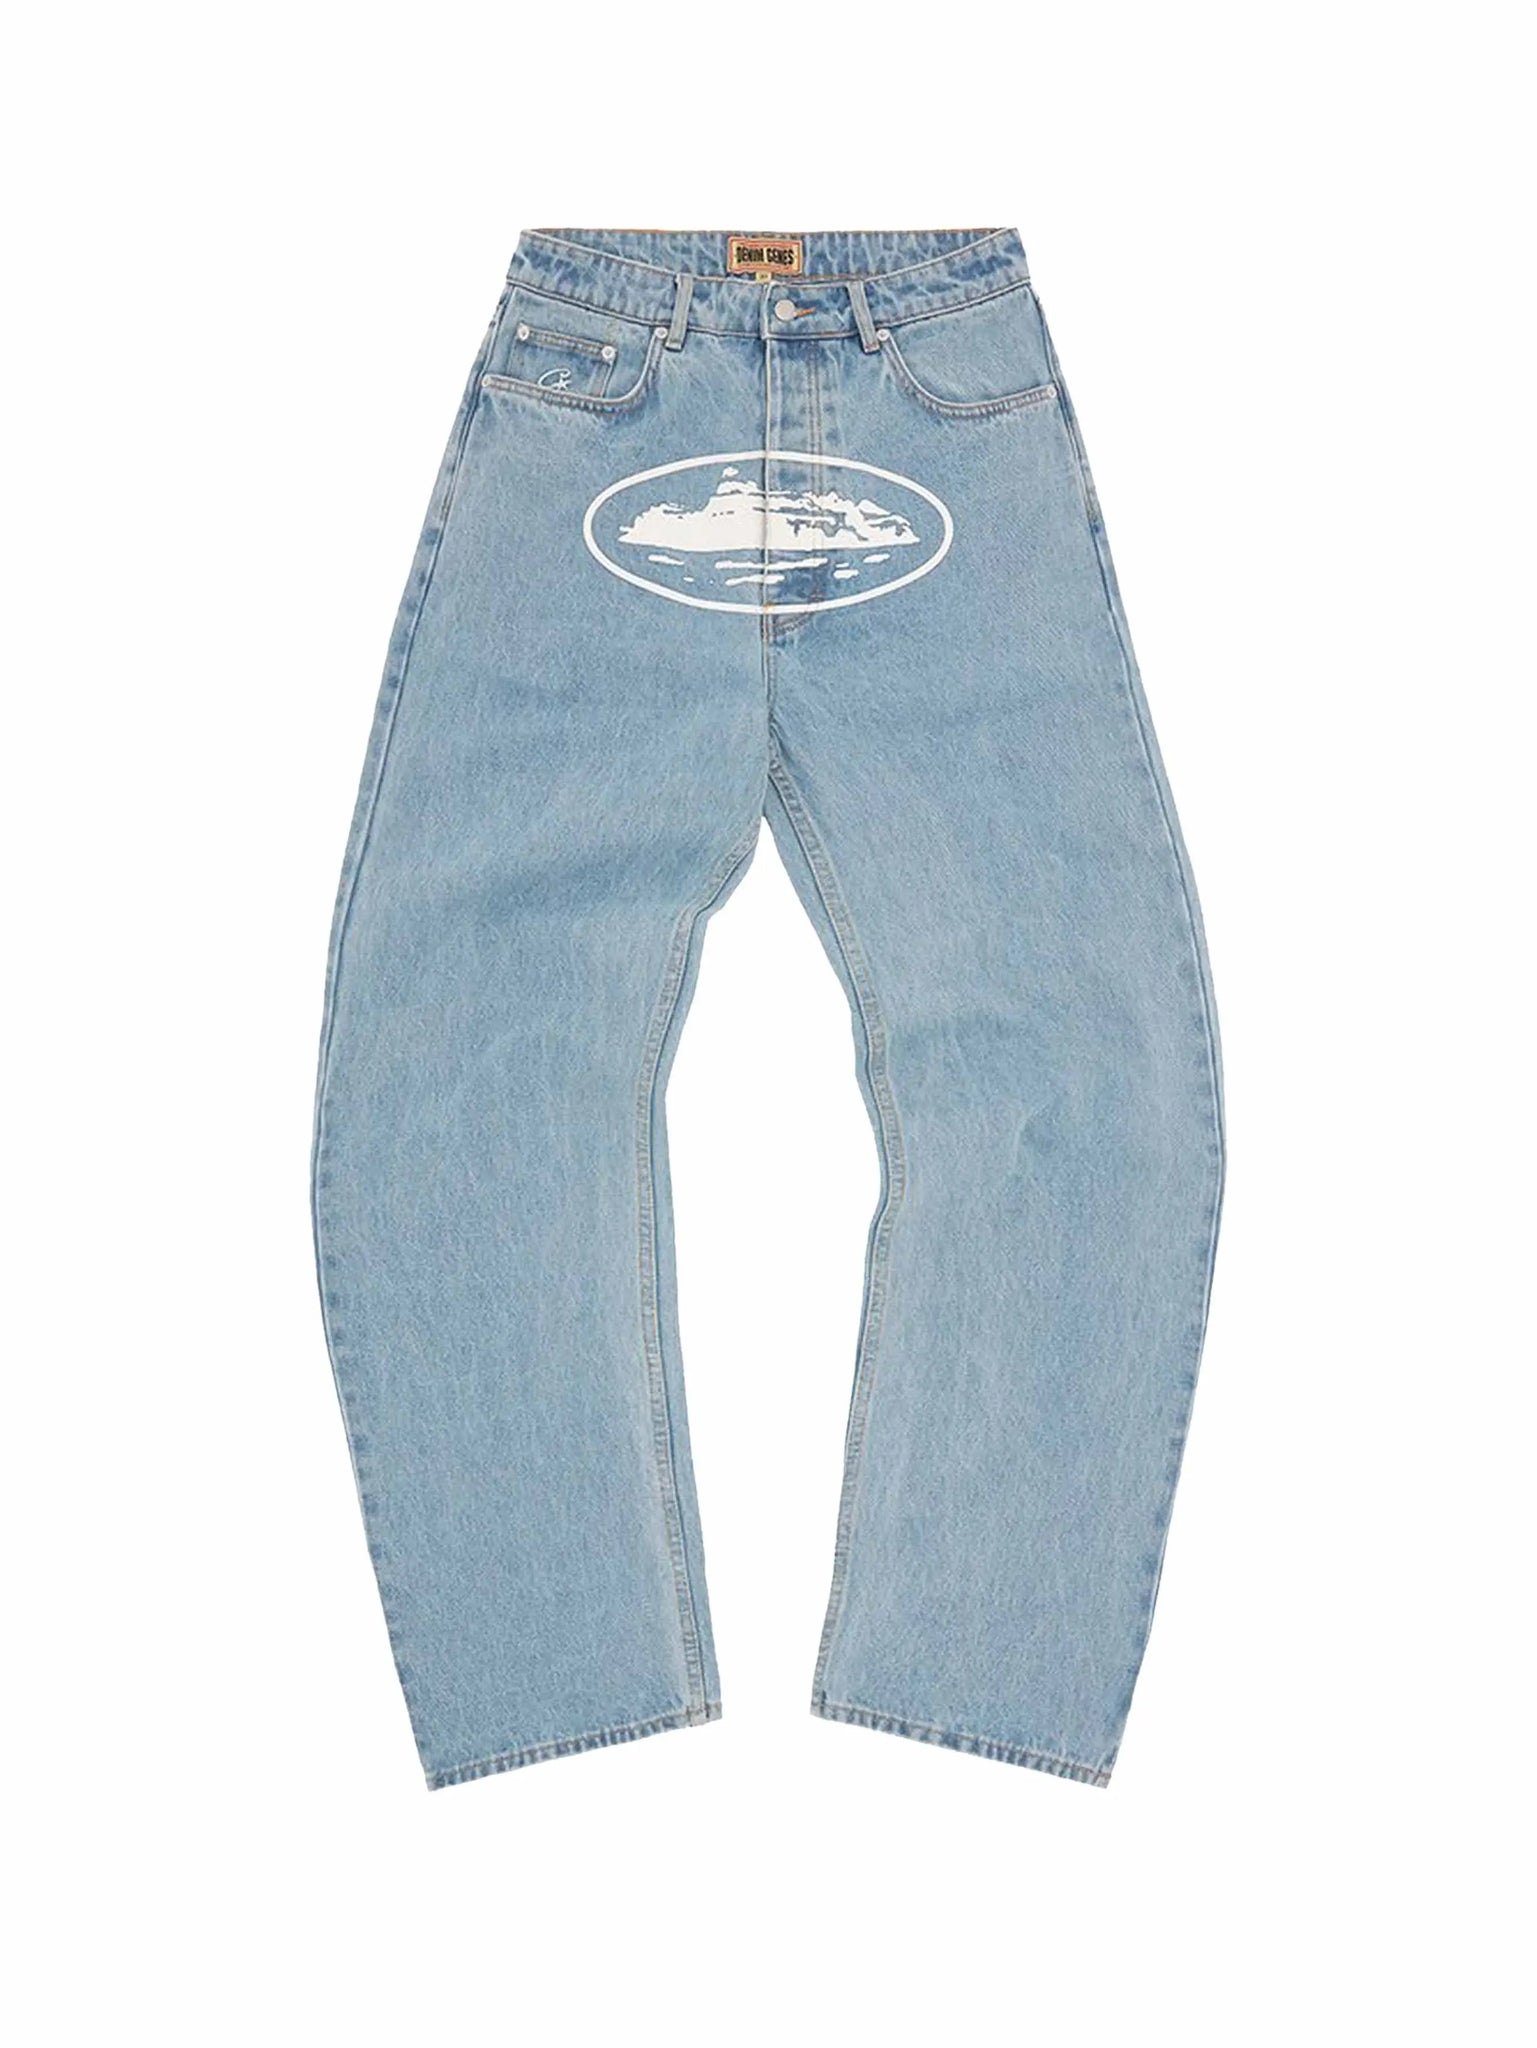 Corteiz Alcatraz Baggy Jeans Washed Blue in Auckland, New Zealand - Shop name